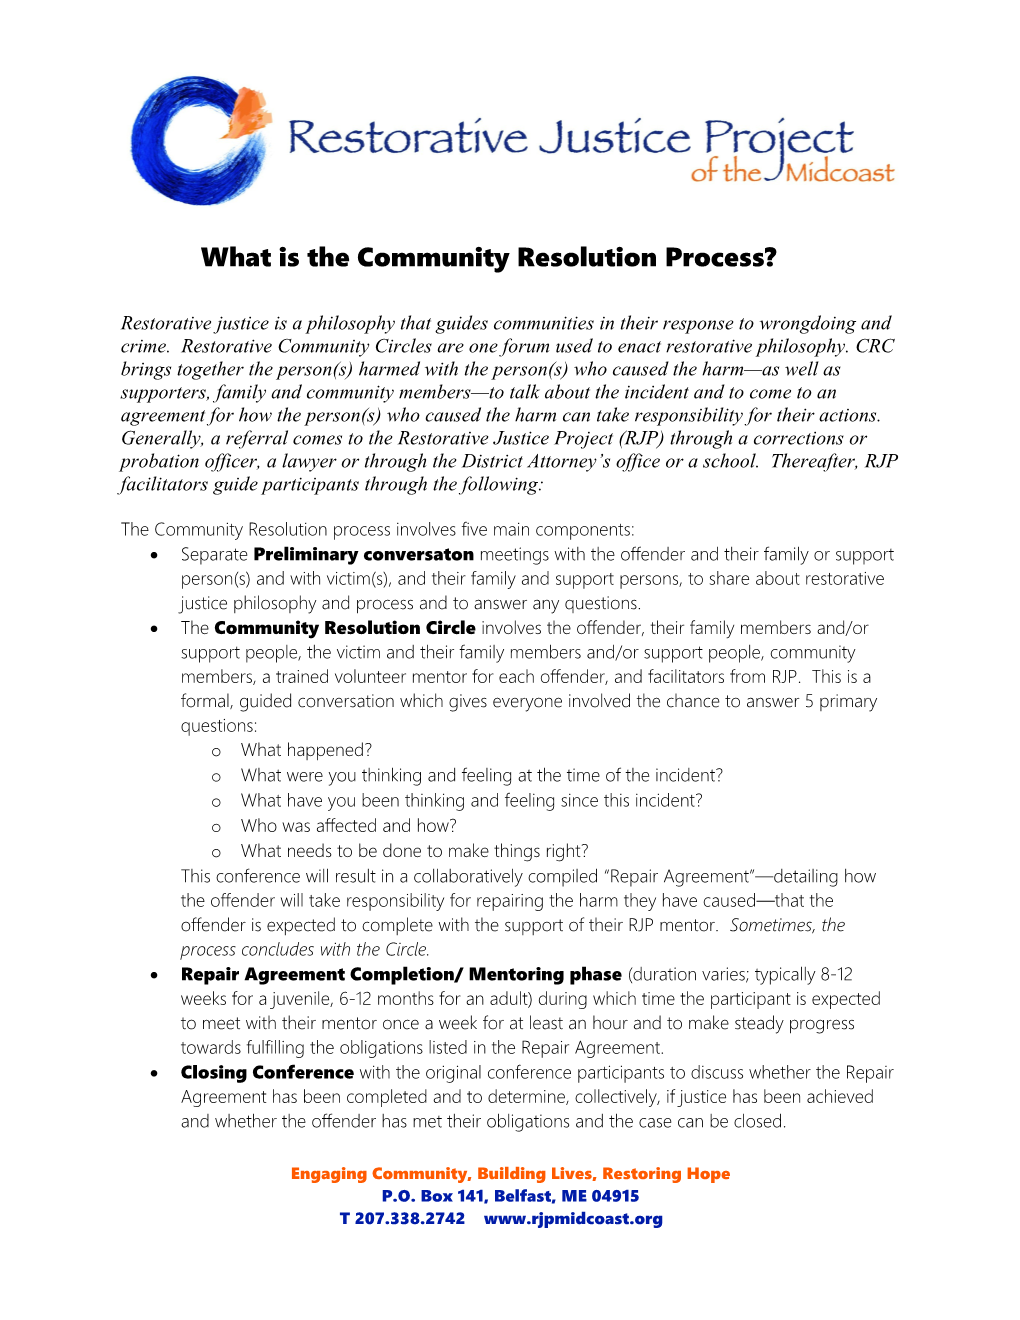 What Is the Community Resolution Process?